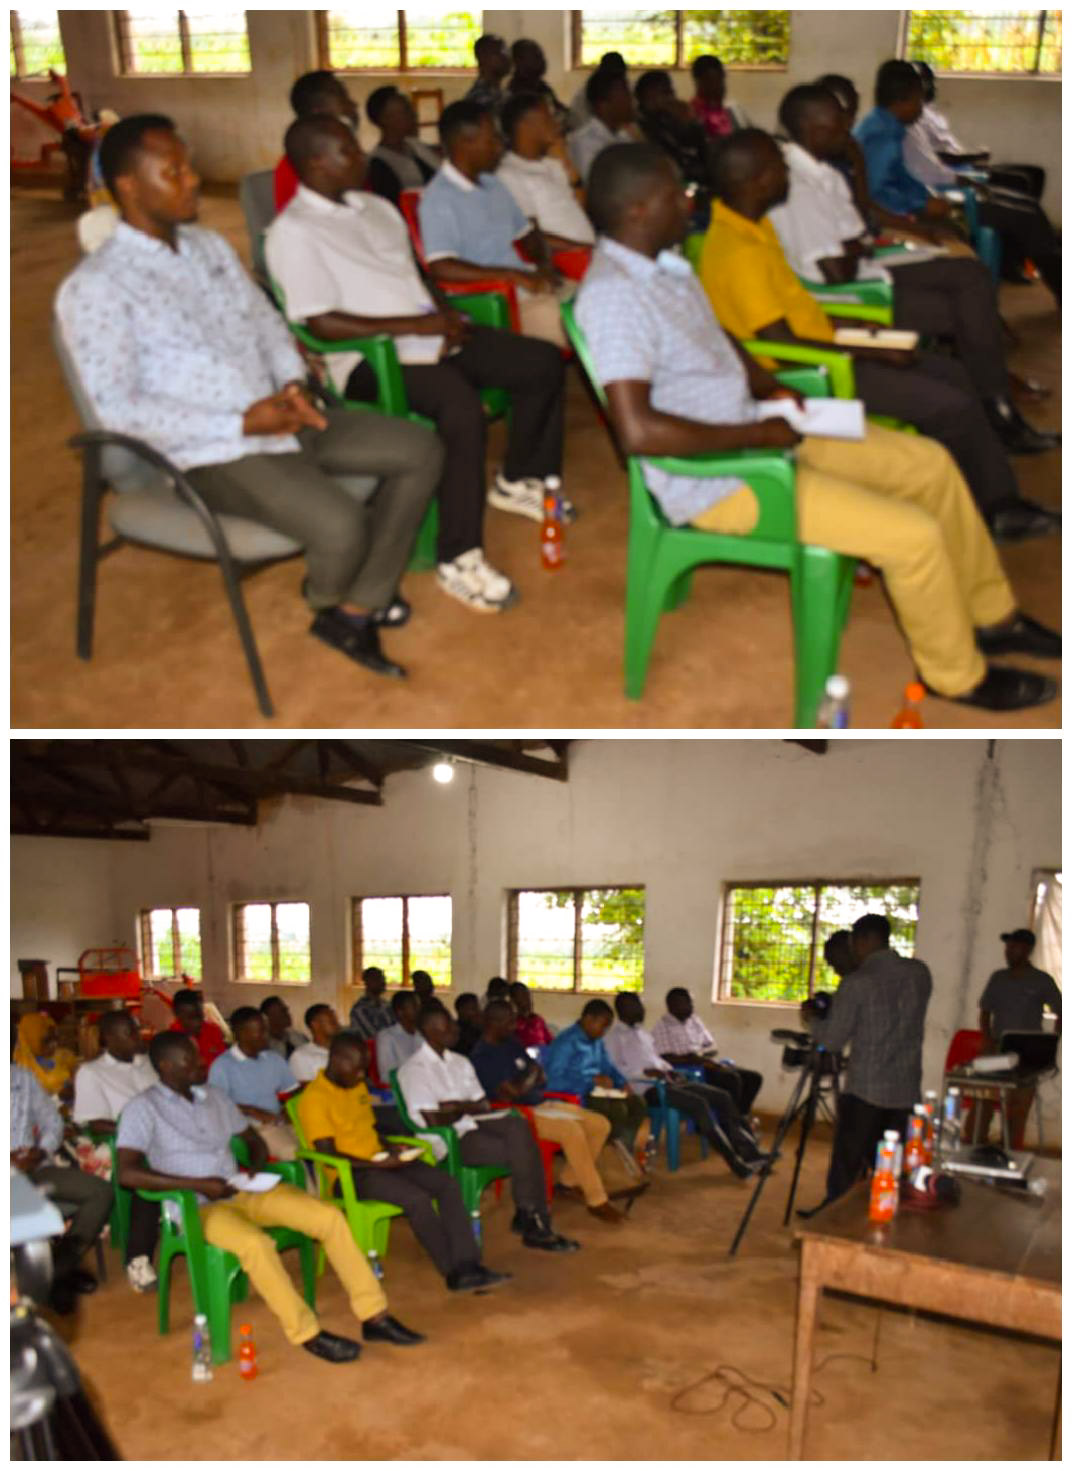 TARI MARUKU has conducted training to TARI kihinga researchers and Agricultural Extension officers of the Buhigwe district in Kigoma region on how to diagnose and control of Banana bunchytop disease (BBT) which has been a big challenge for the banana grow